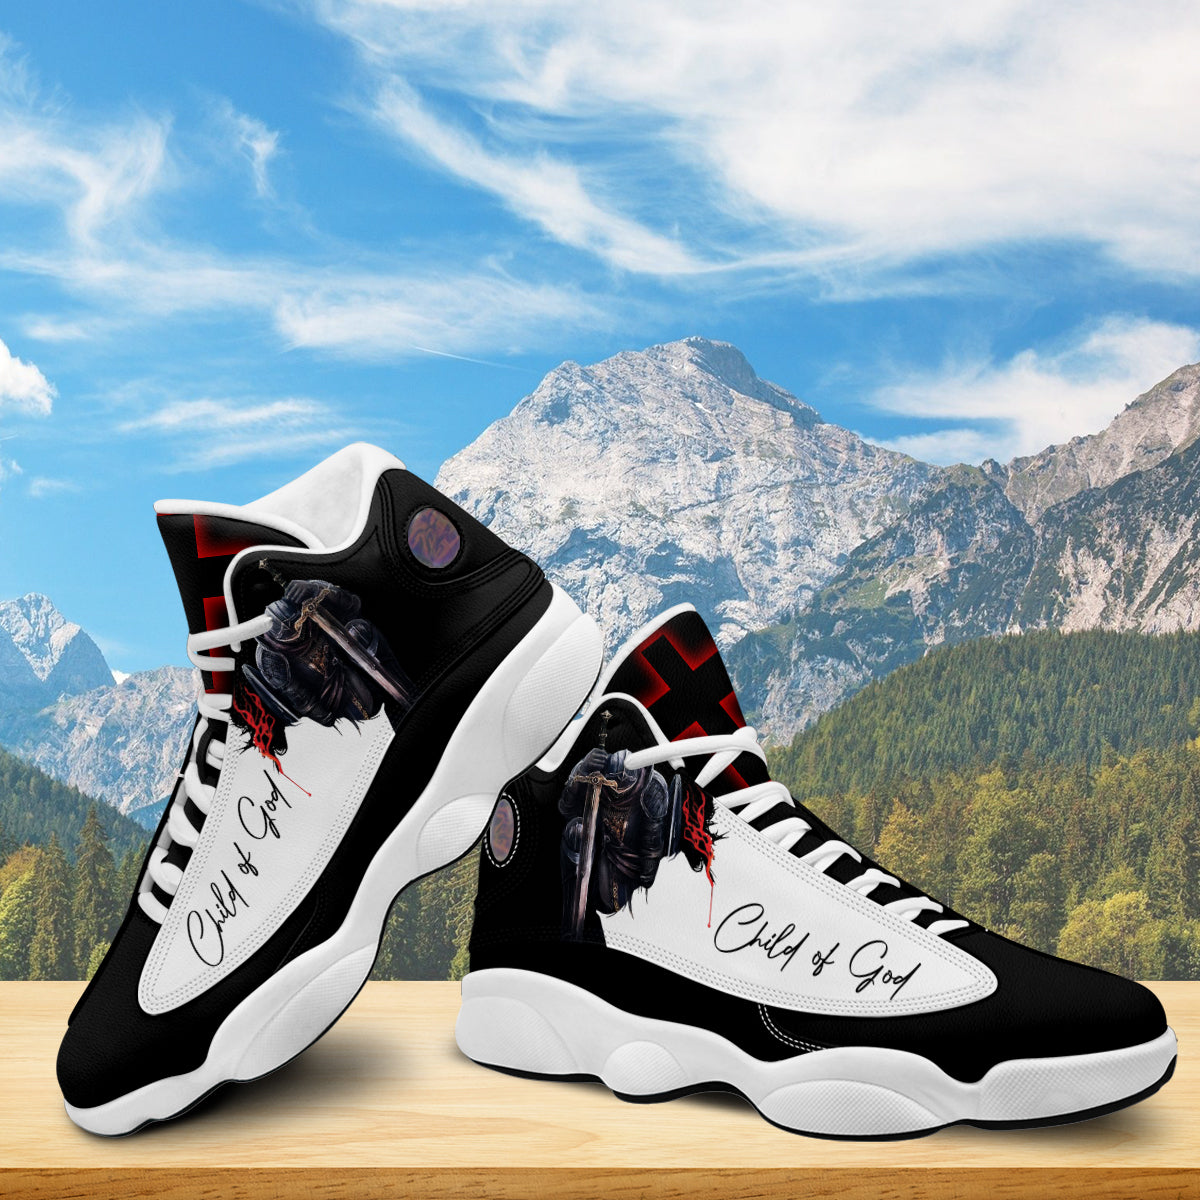 A Child Of God Jesus Basketball Shoes For Men Women - Christian Shoes - Jesus Shoes - Unisex Basketball Shoes